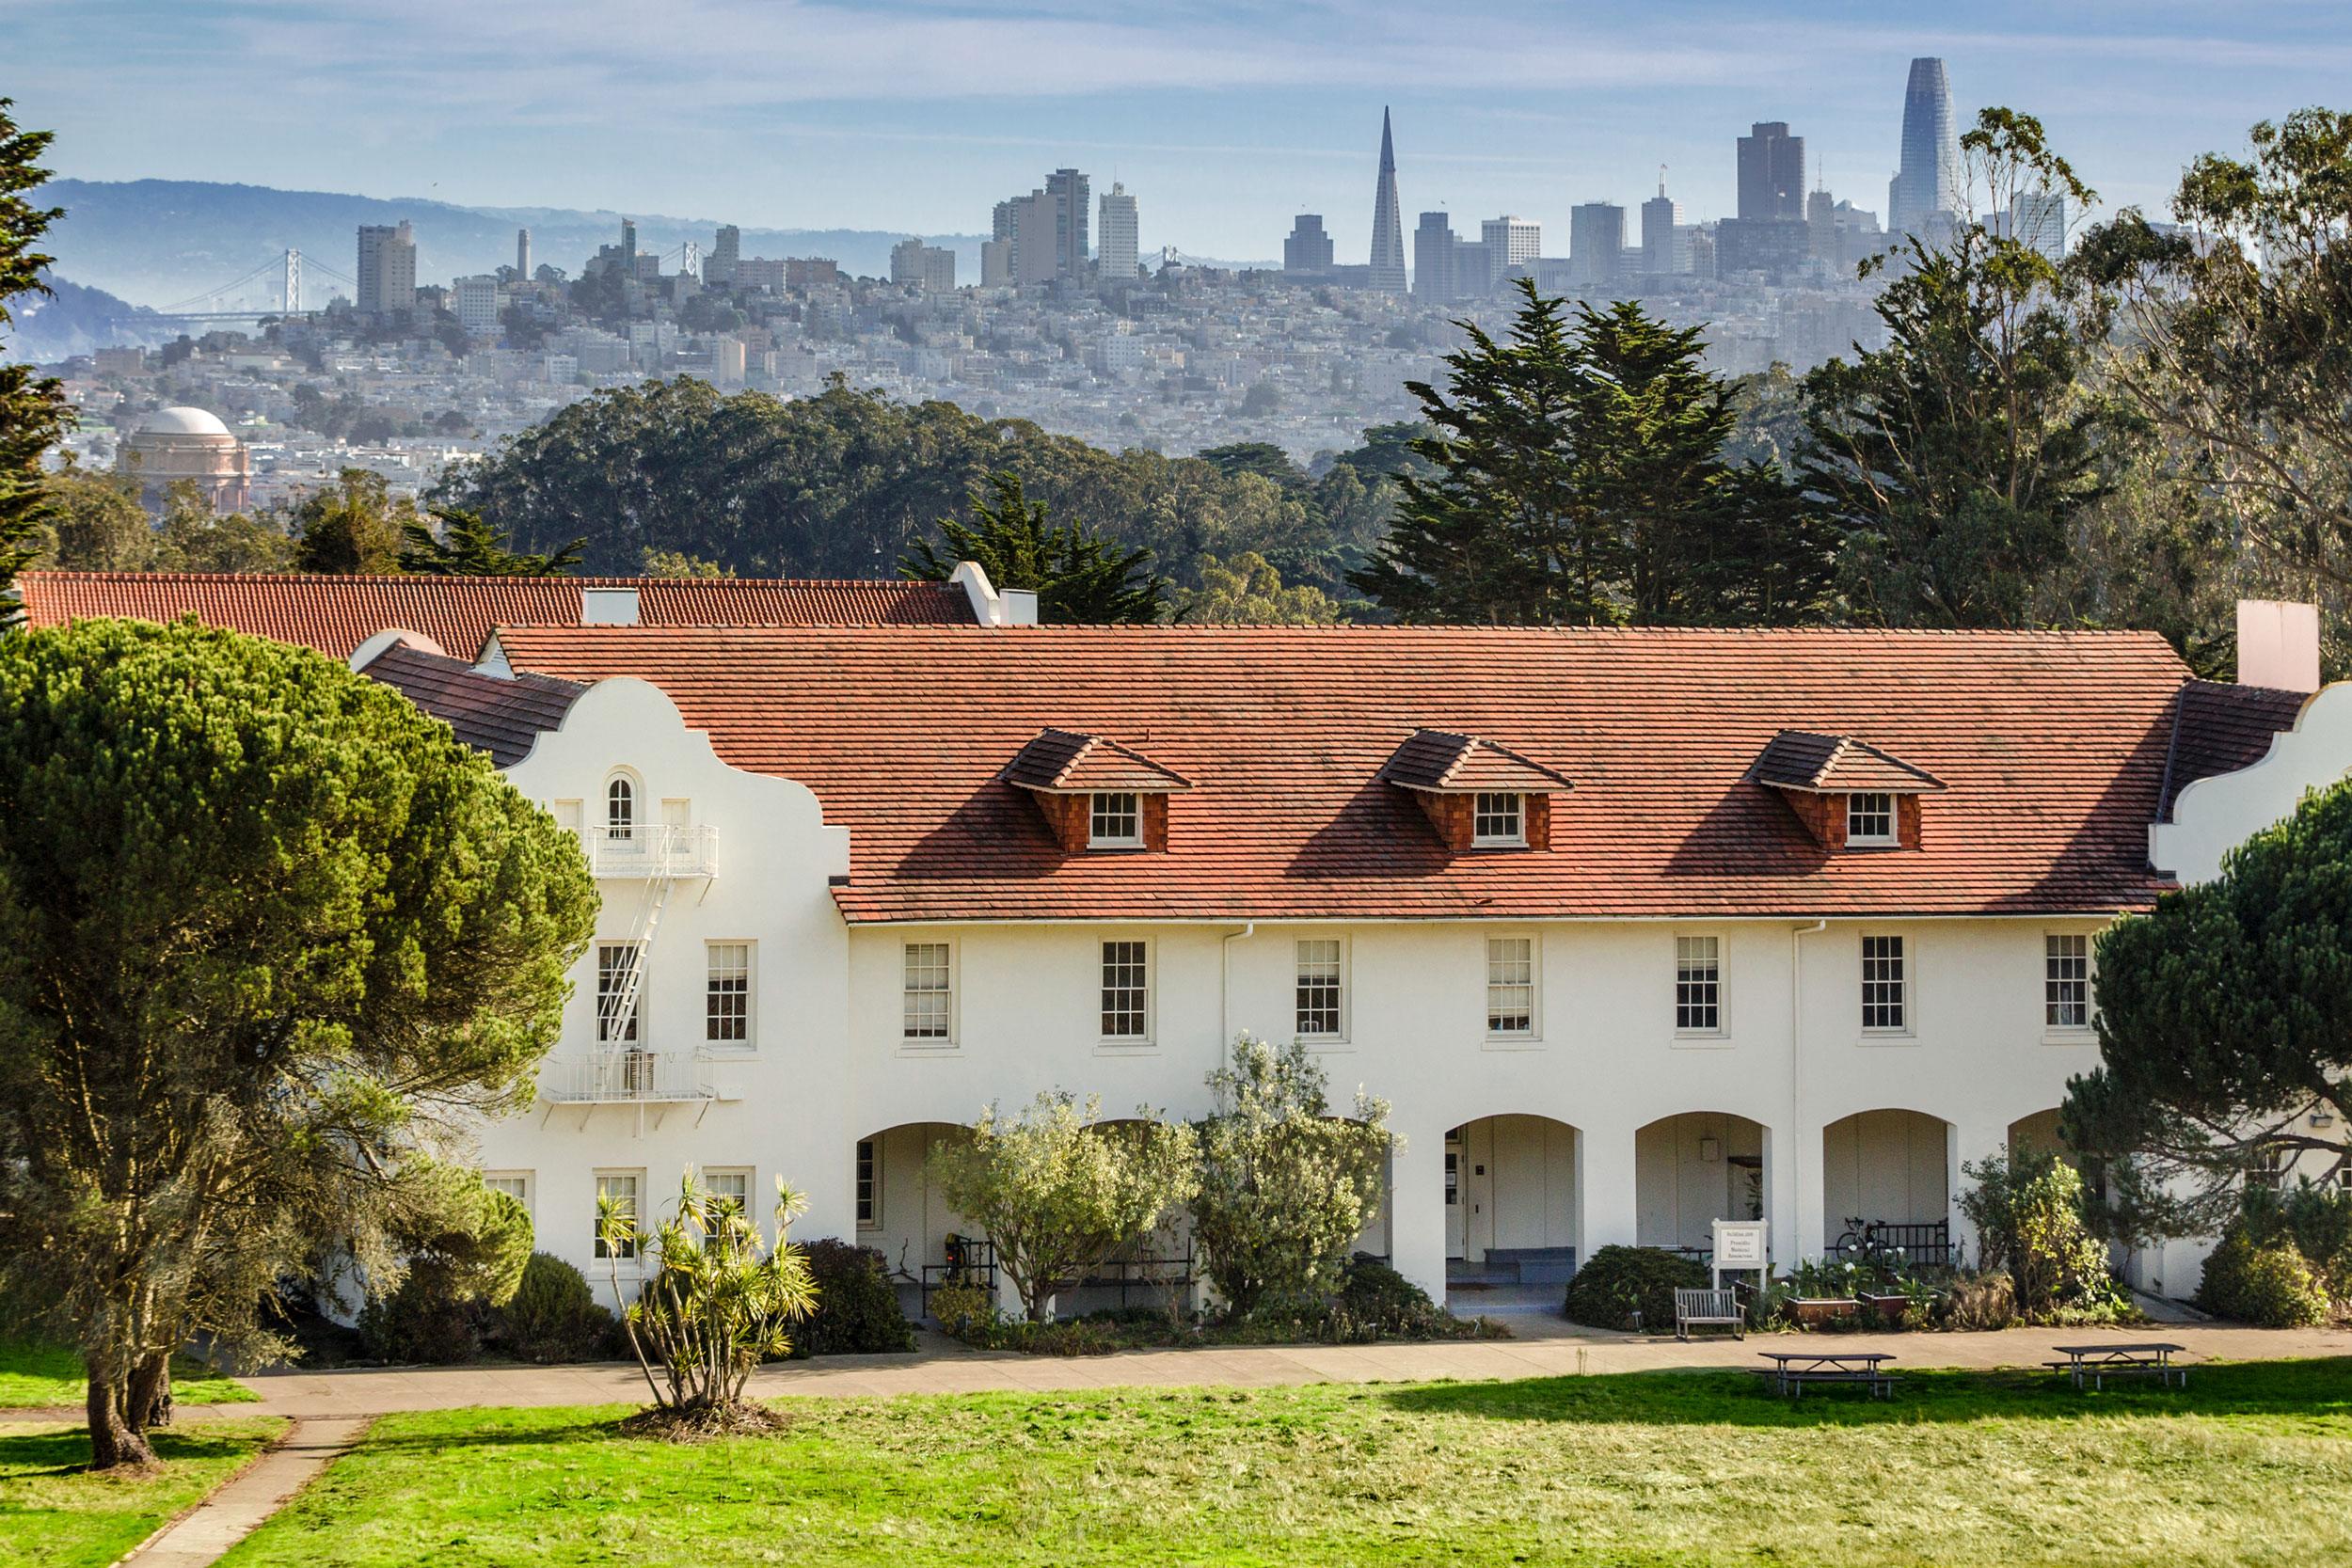 Fort Scott with the San Francisco skyline in the background. Photo by Charity Vargas.